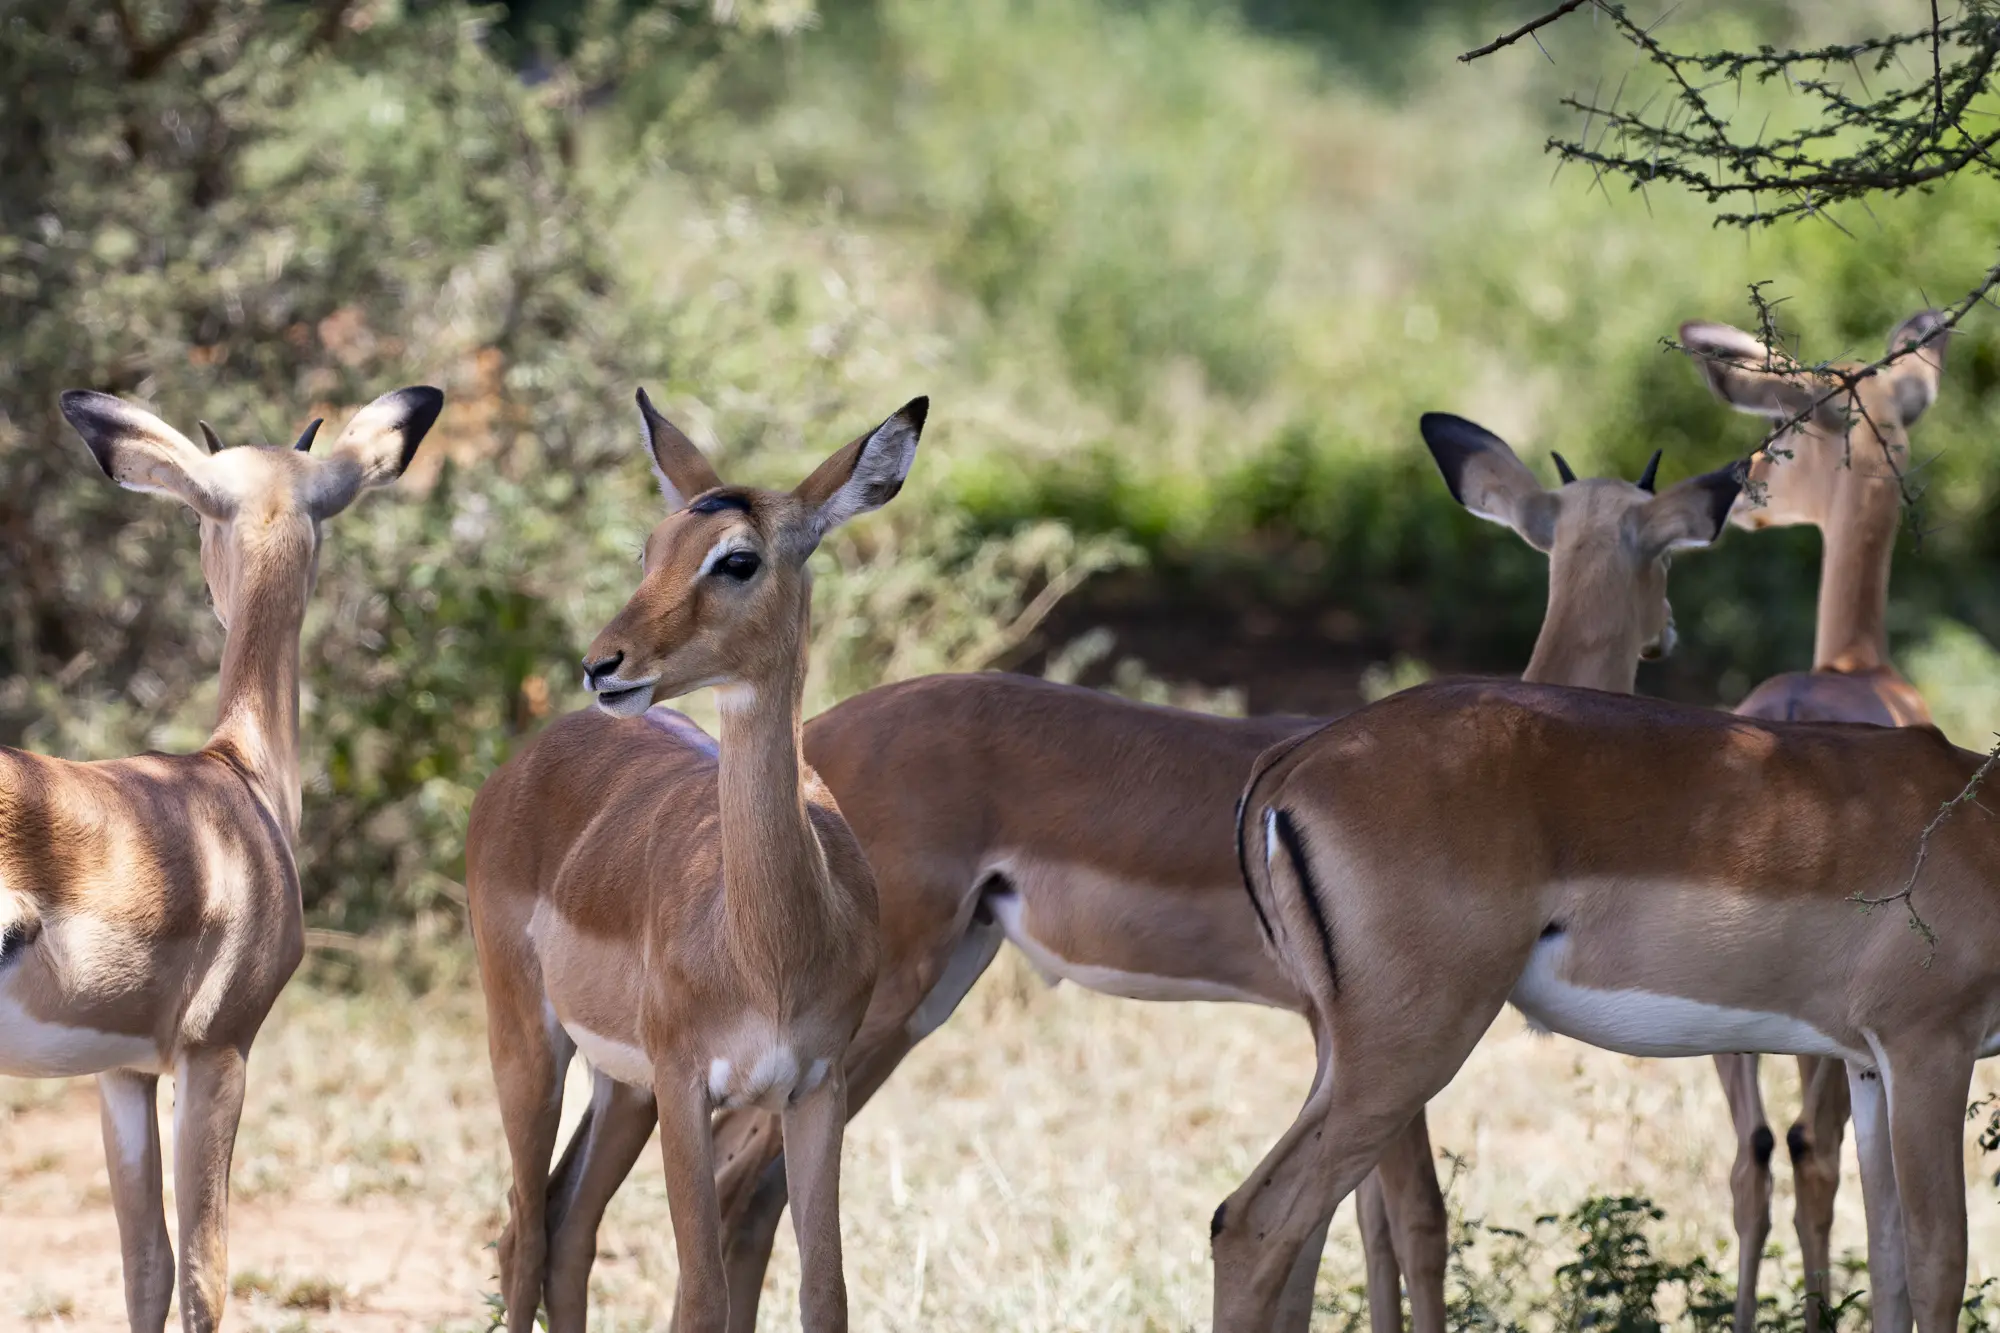 Impalas in the shade